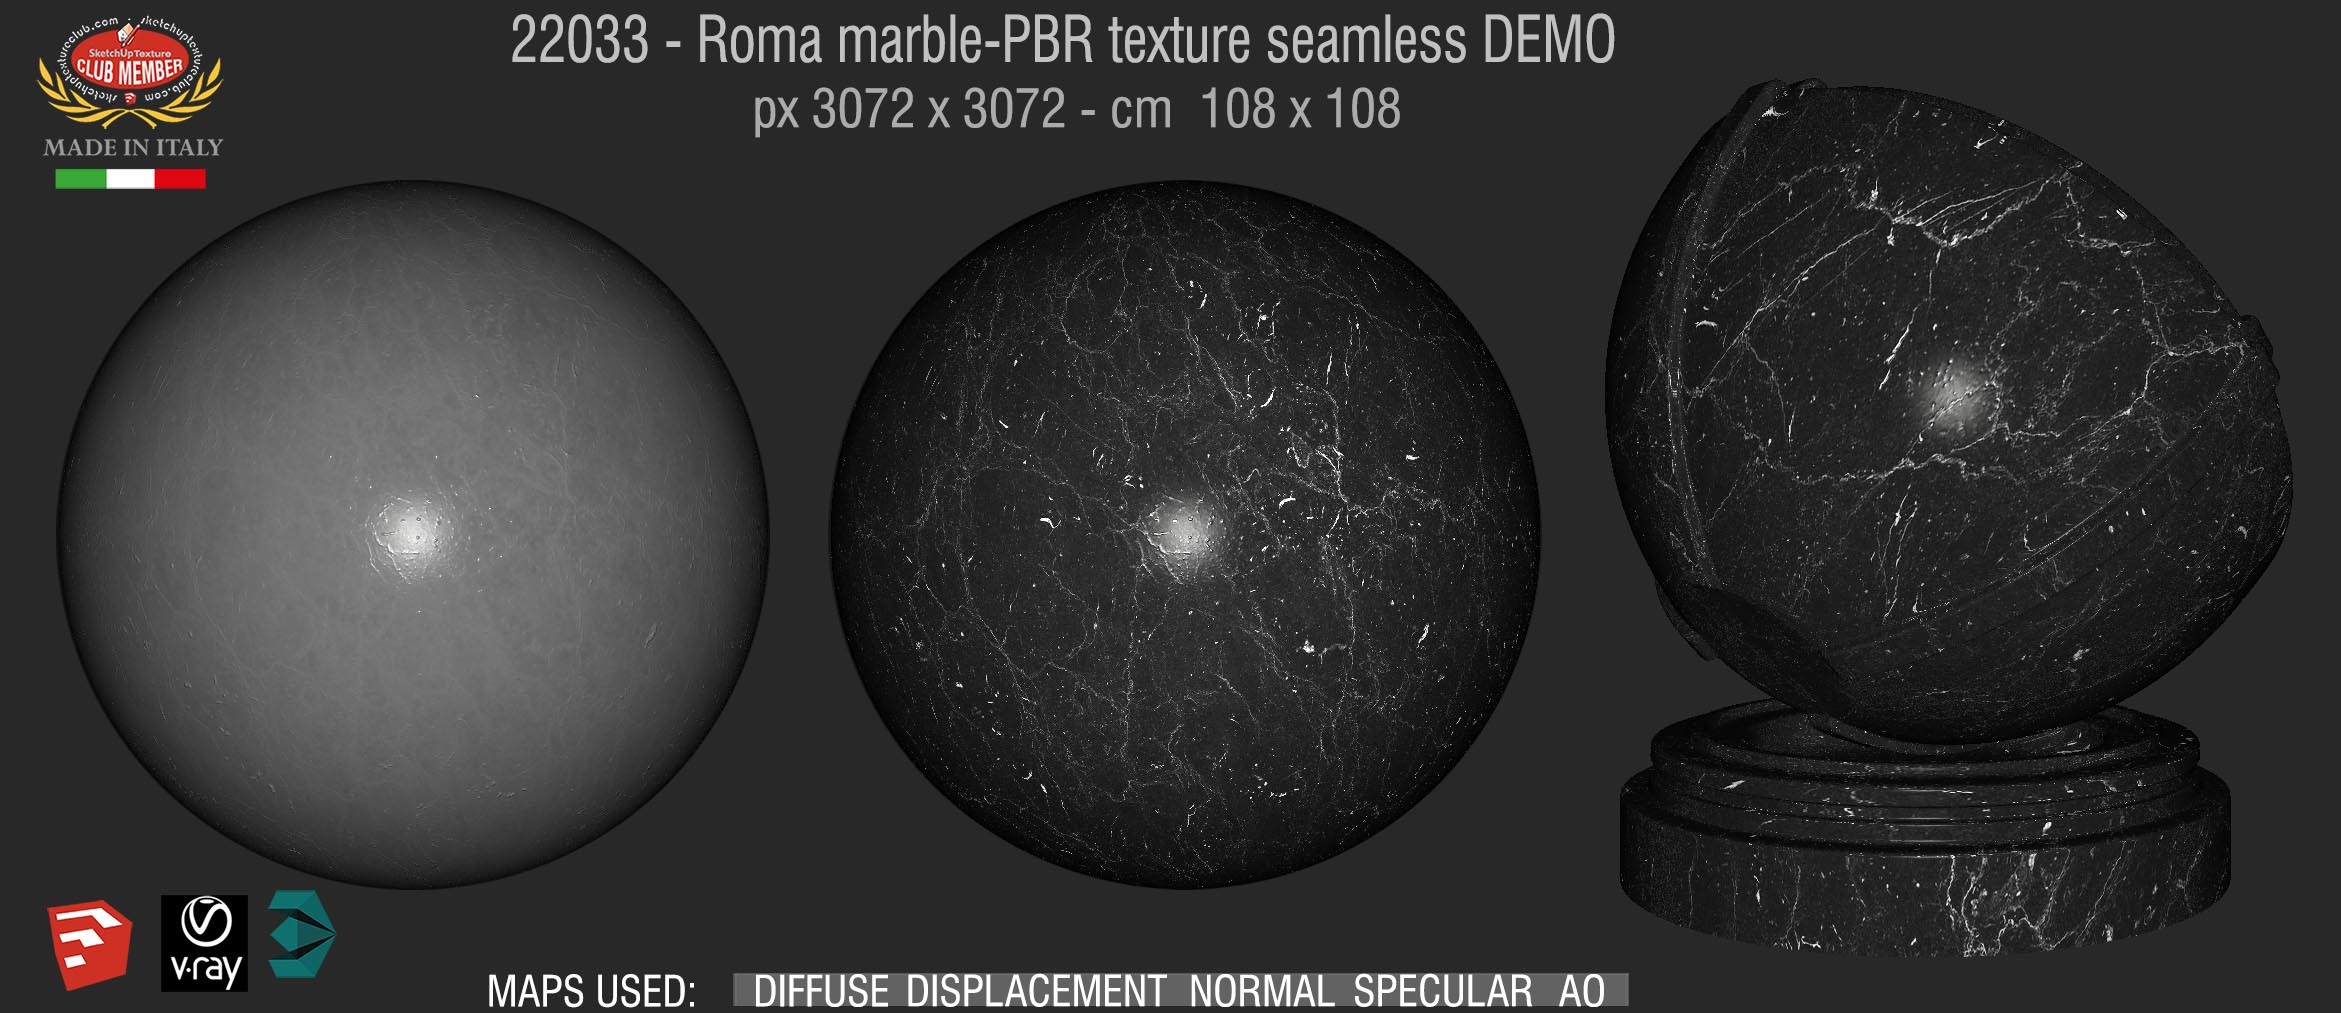 22033 Roma marble-PBR texture seamless DEMO